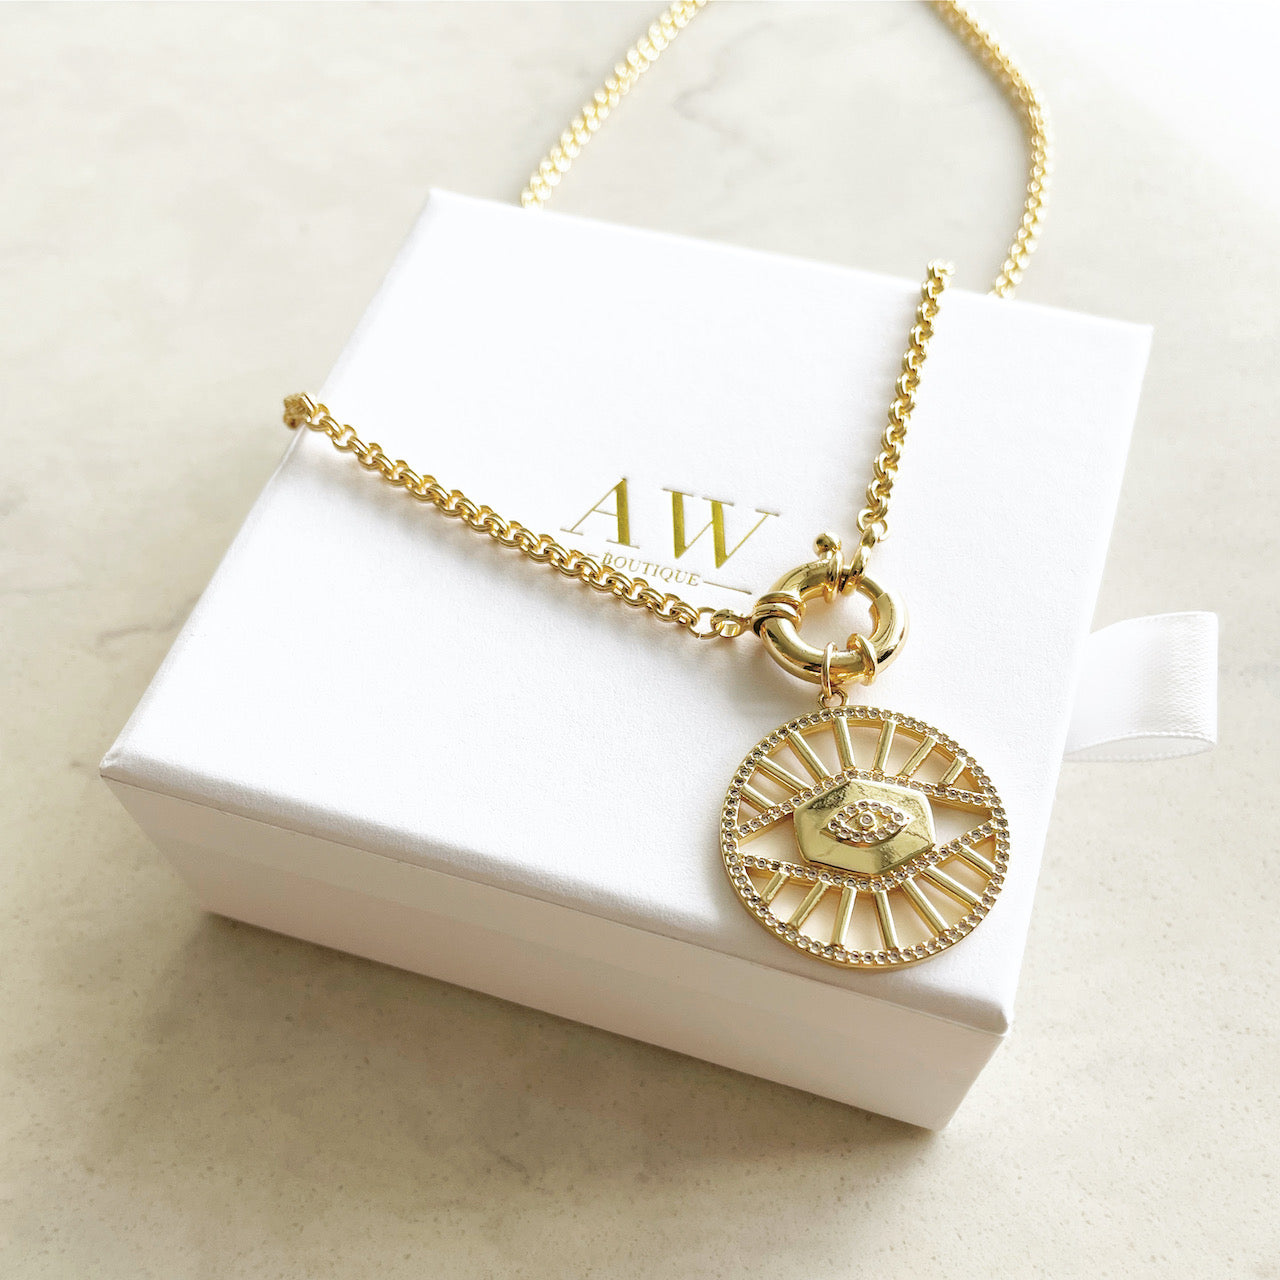 Gold filled evil eye medallion pendant charm necklace. This is a bold gold necklace design. Australian jewellery brand AW Boutique.  The necklace is sitting on top of an AW Boutique white gift box.